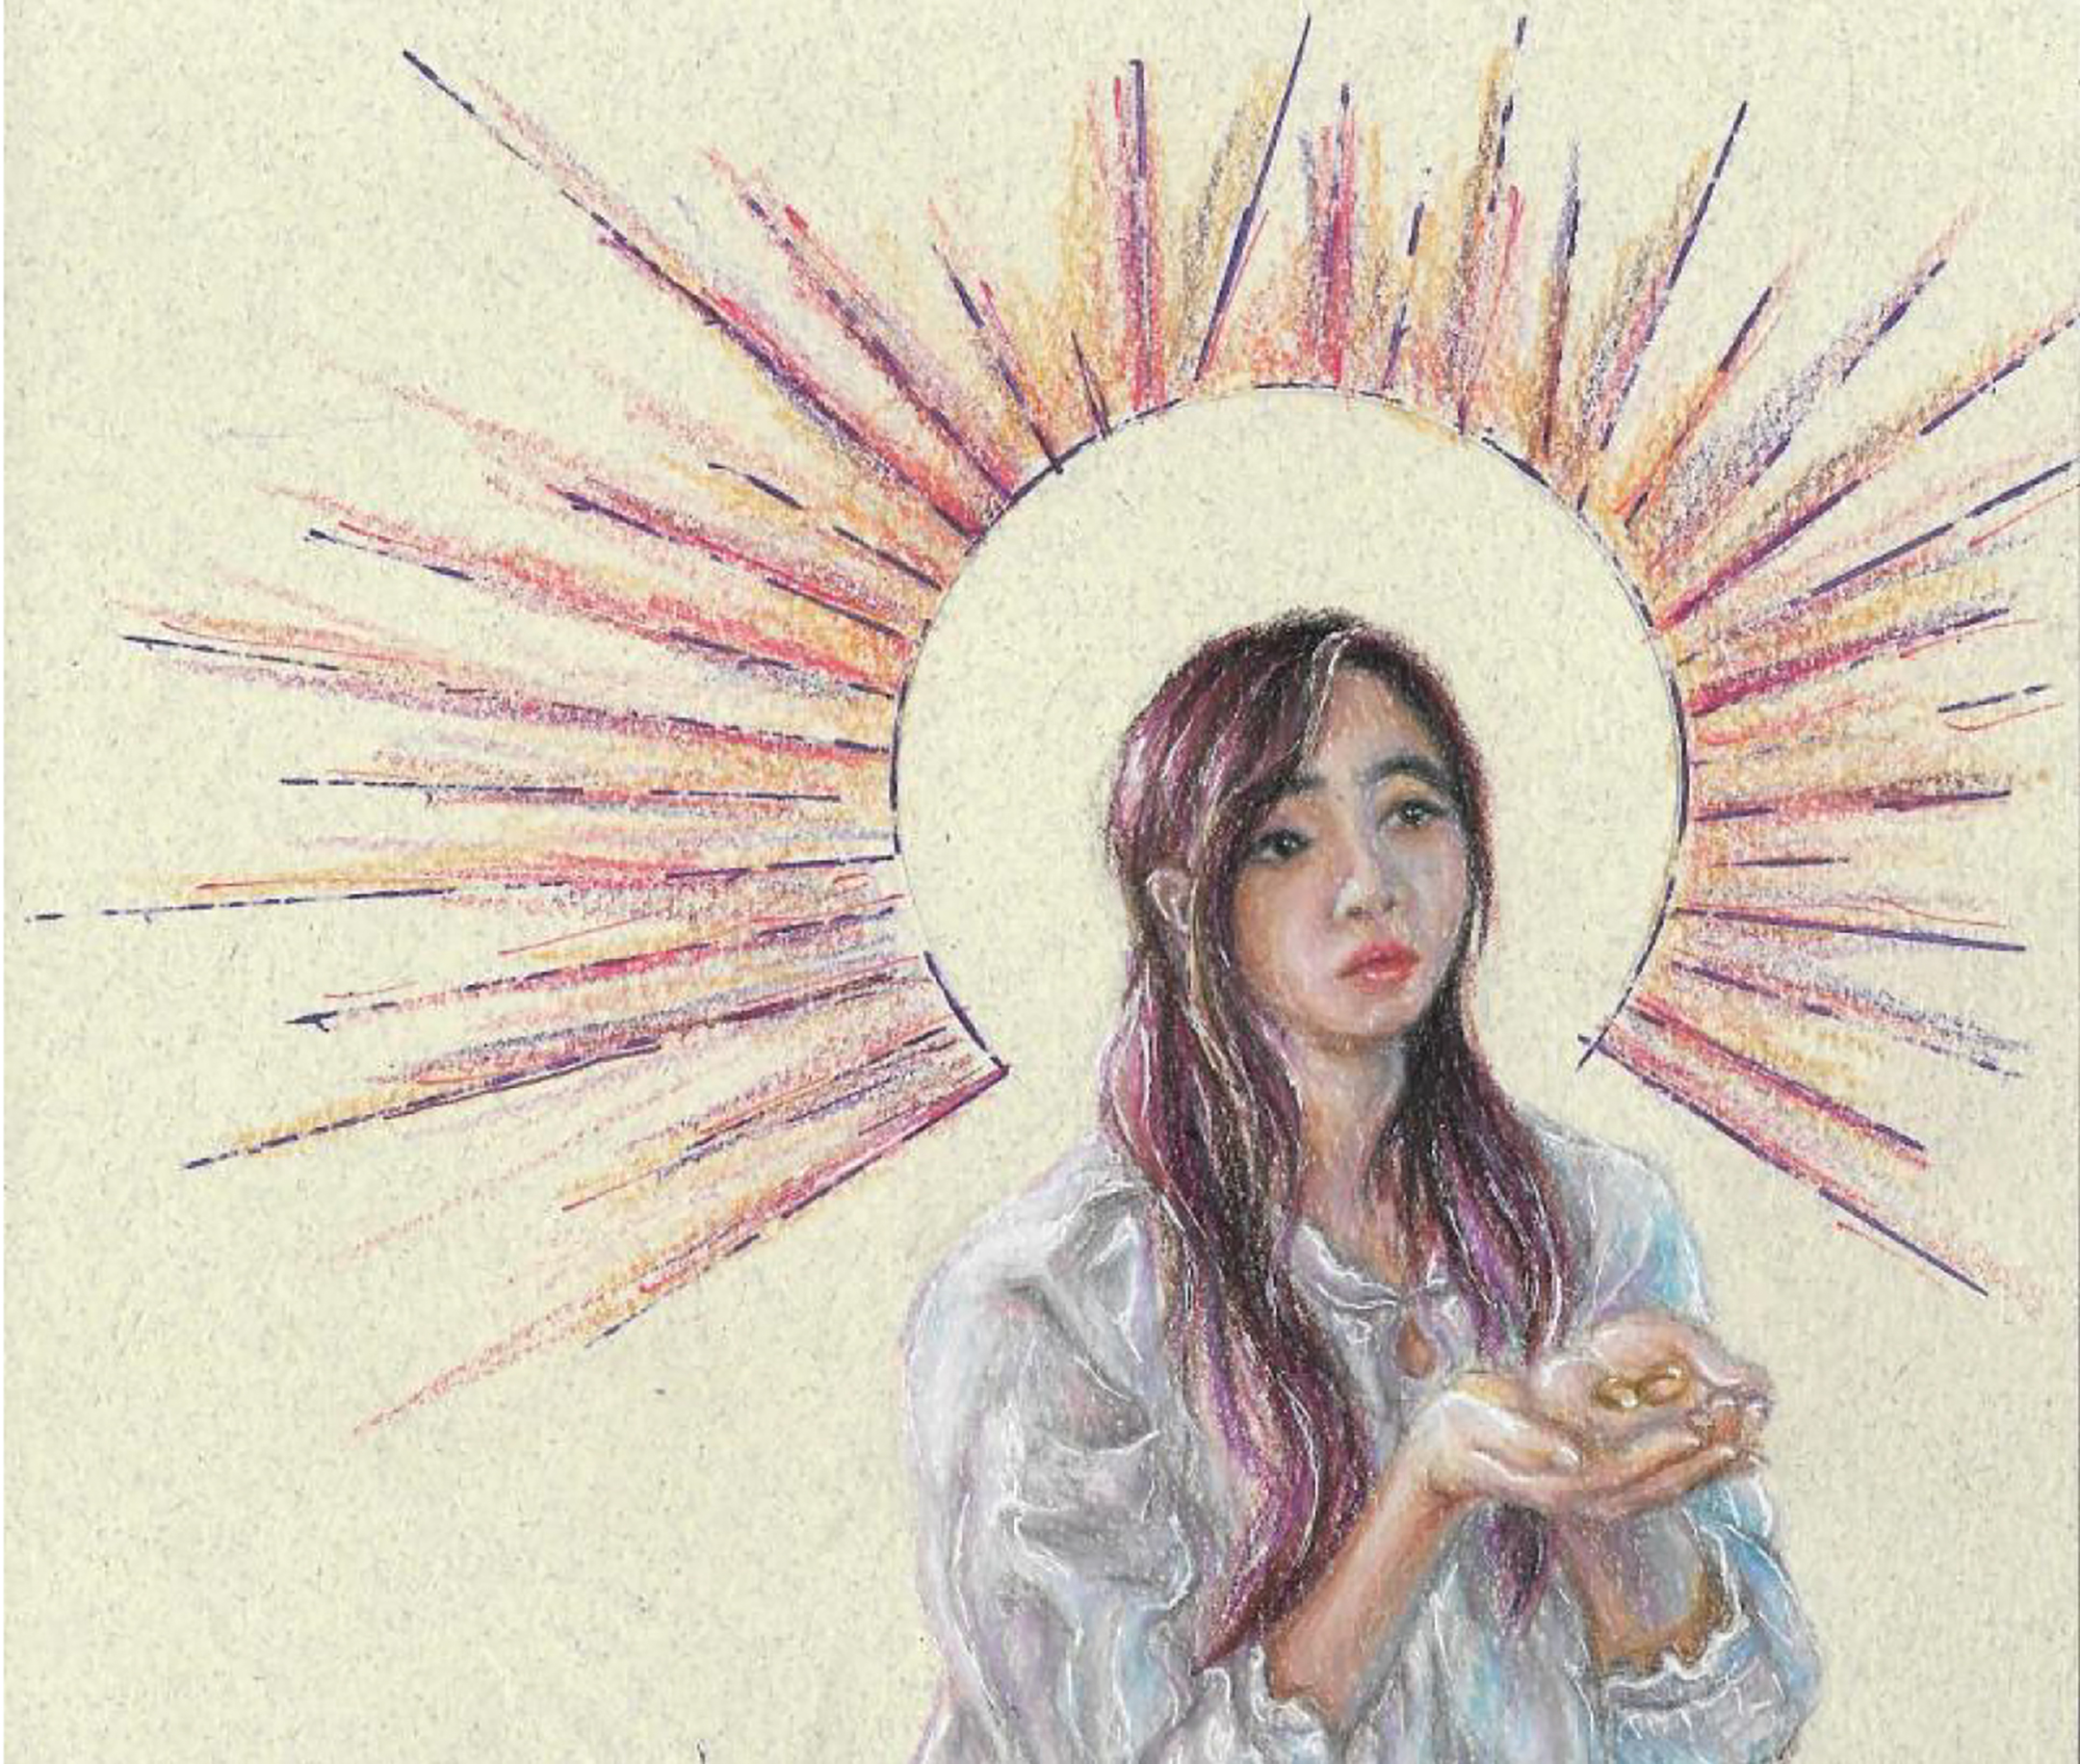 illustration of a young woman with a saintly halo around her head, holding her hands out and open with two wedding rings in the palm